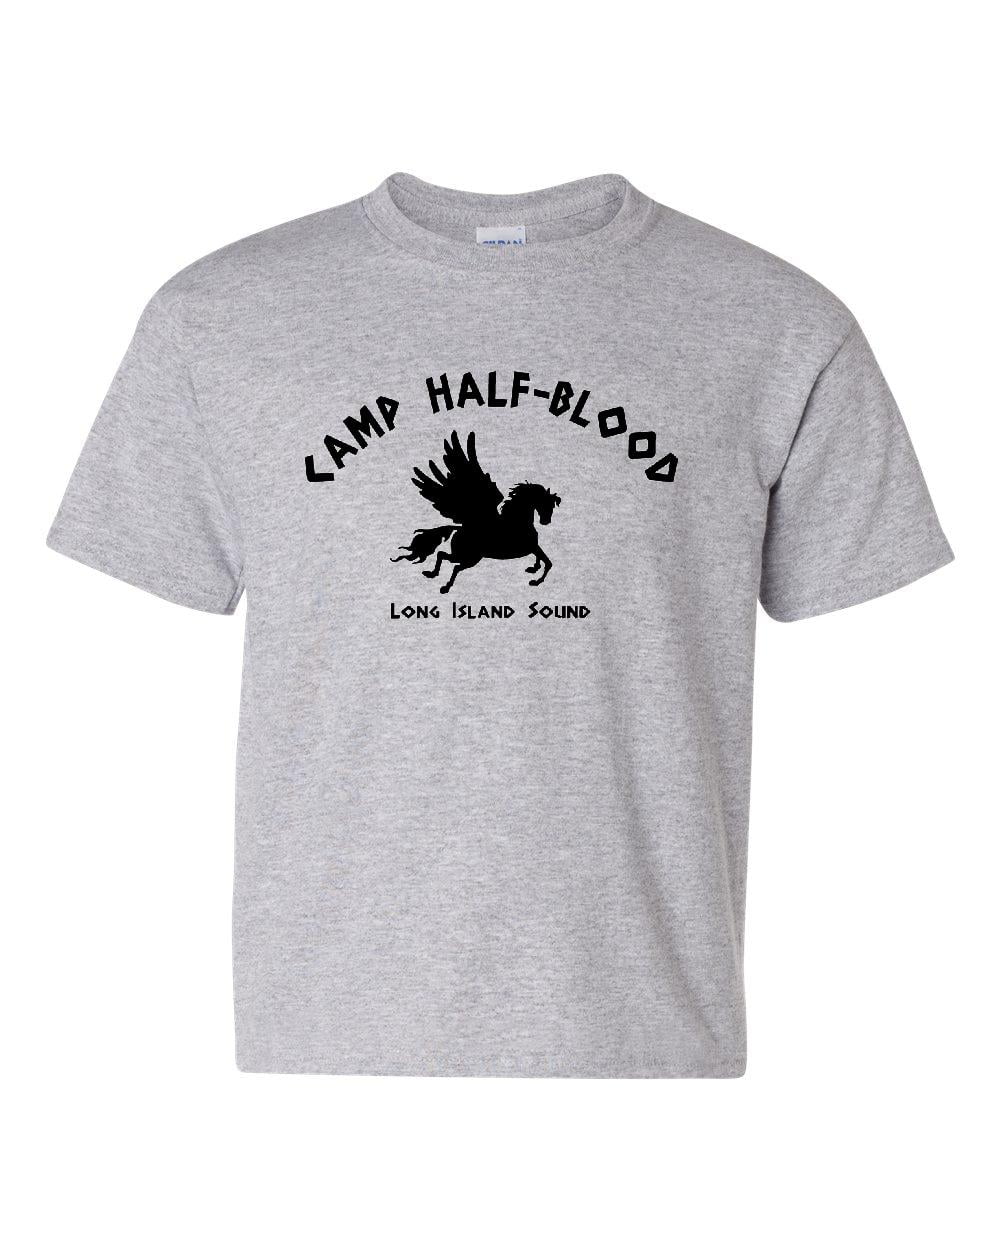 Shop Durable Unisex Camp Half Blood T Shirt At An Affordable Price